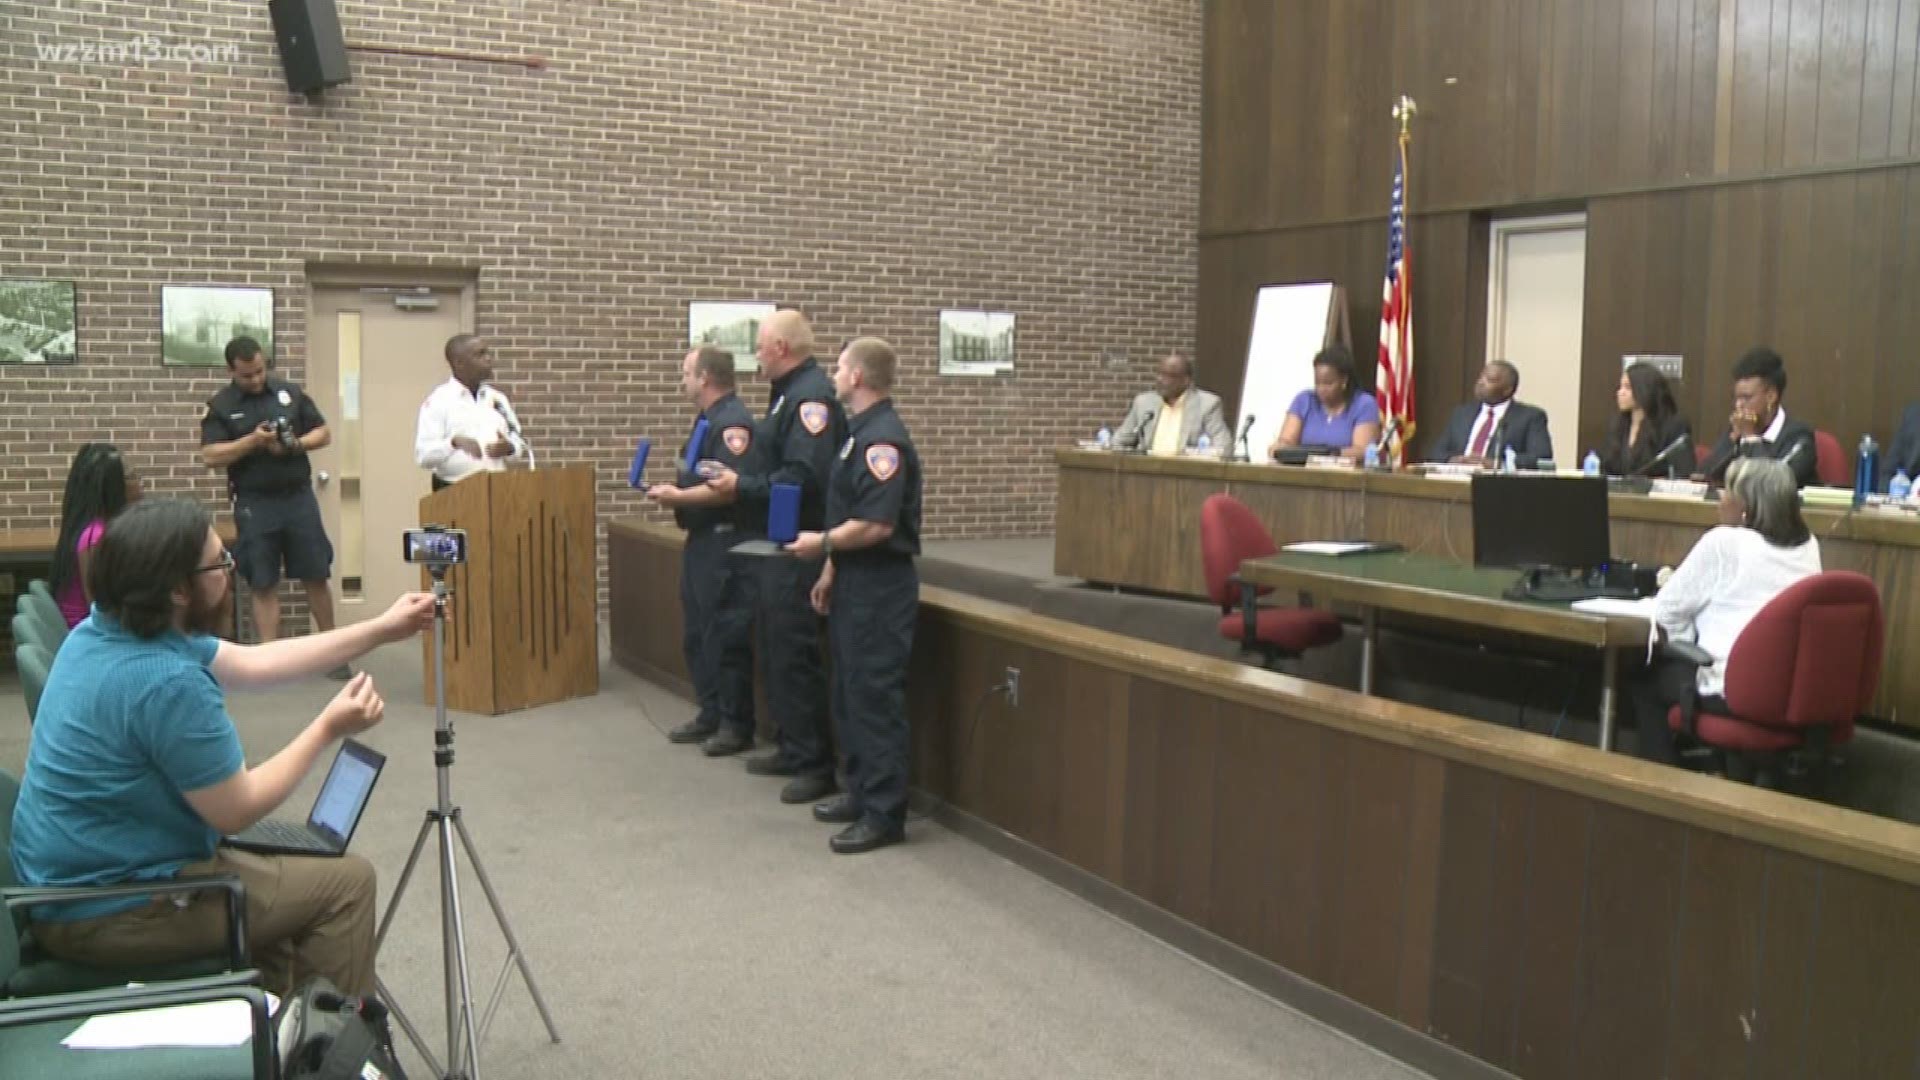 Muskegon Heights firefighters honored